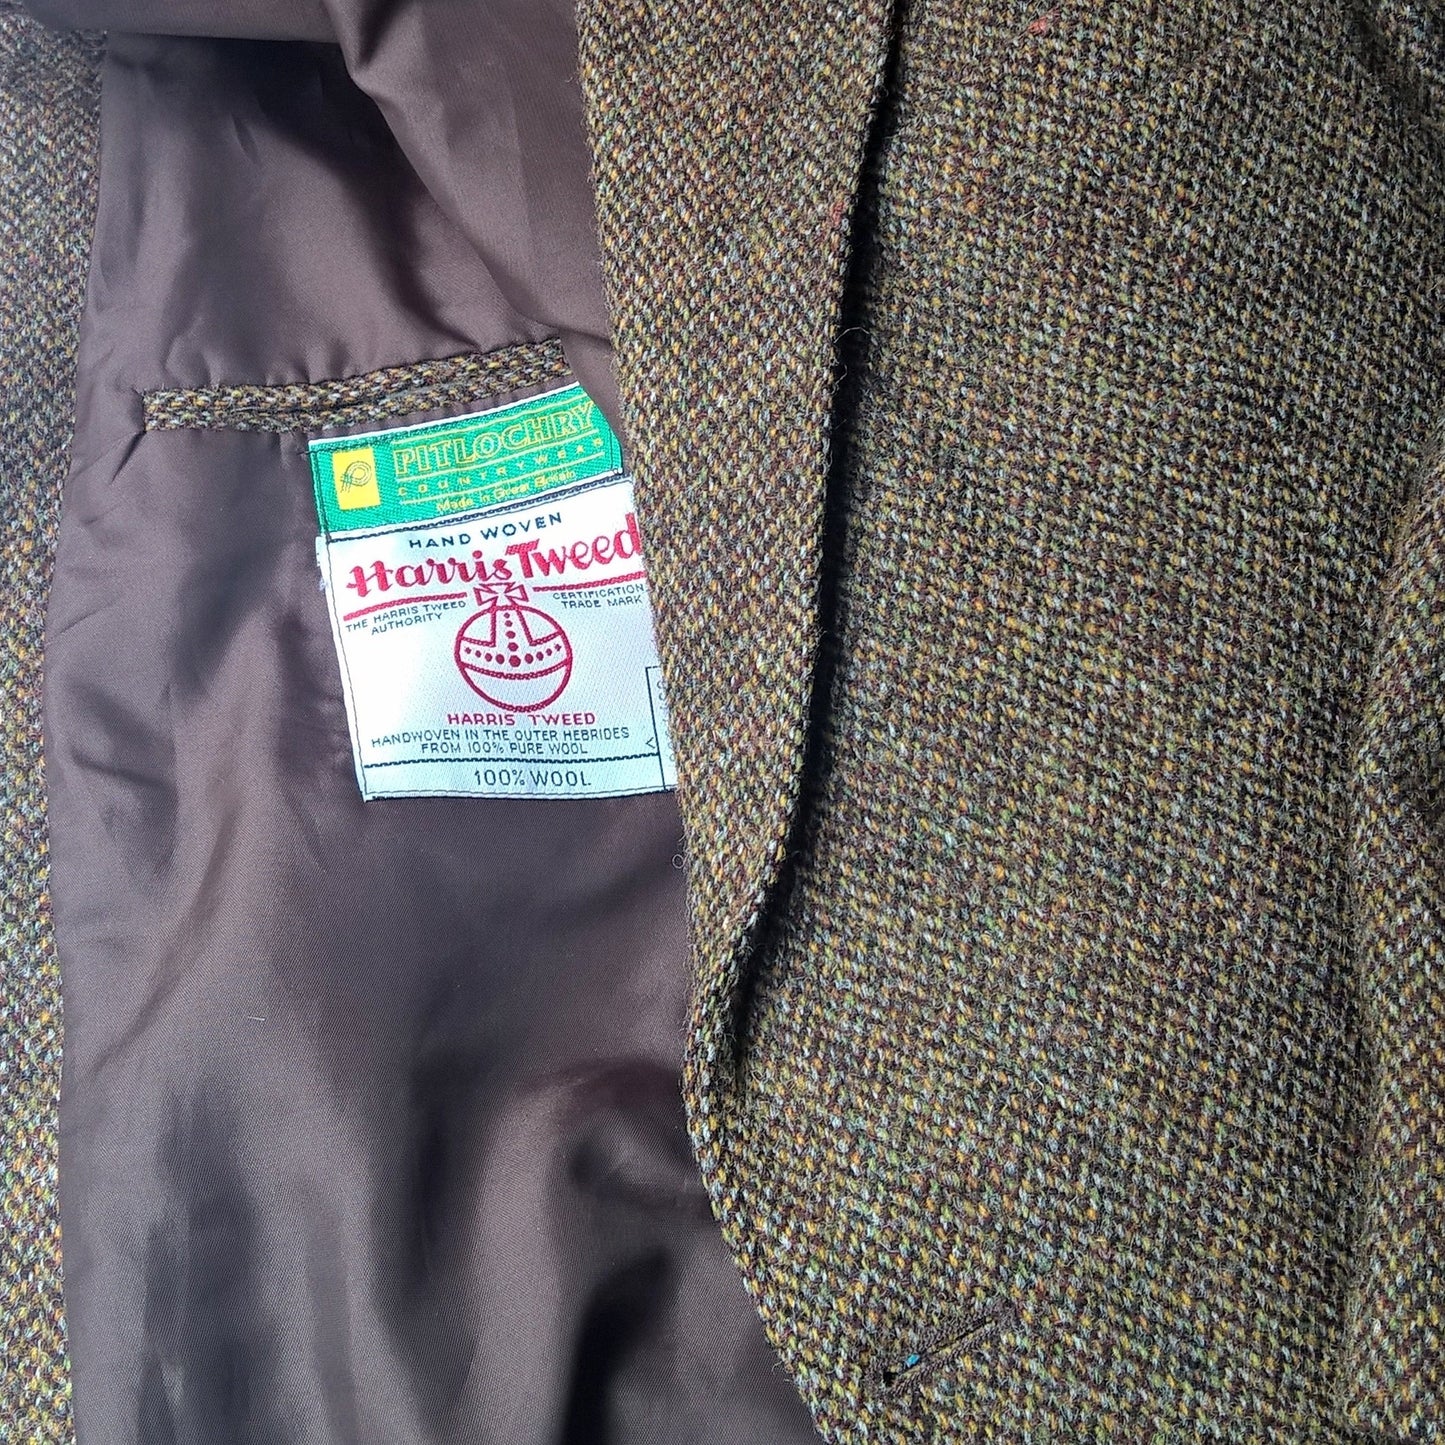 One of the vintage Harris  Tweed jackets used to make the hat